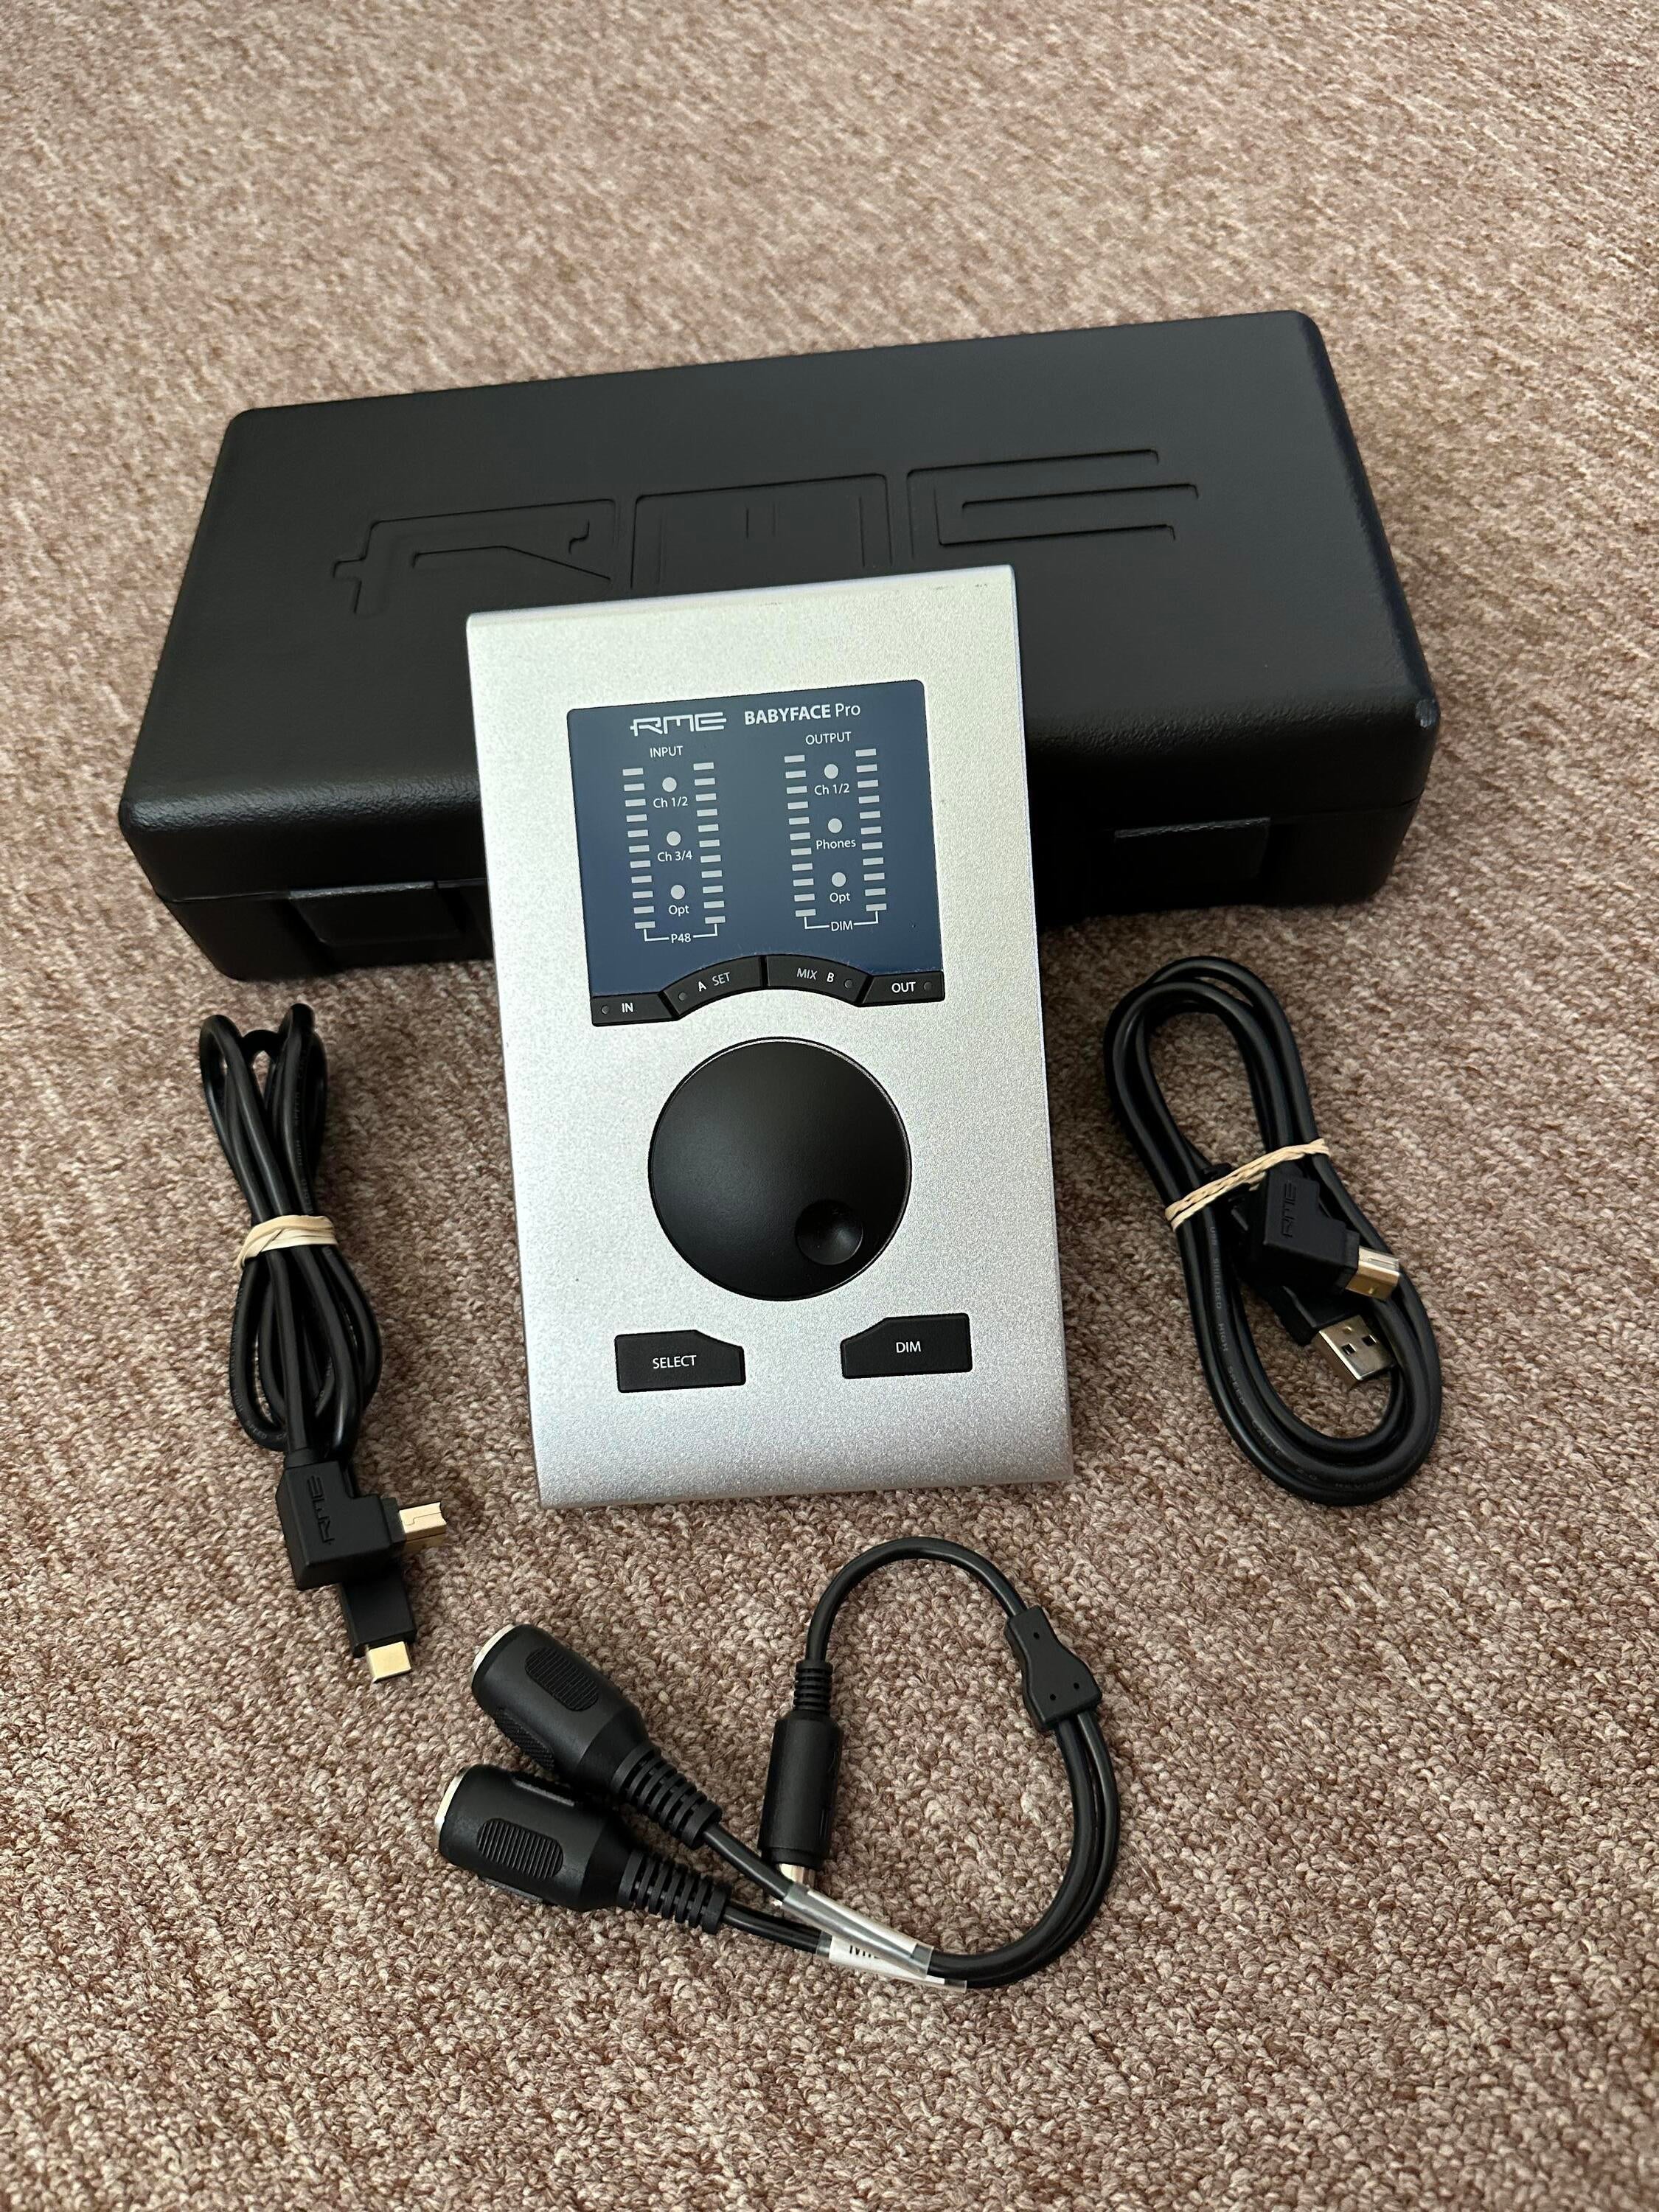 Used RME Babyface Pro USB Audio Interface - Sweetwater's Gear Exchange